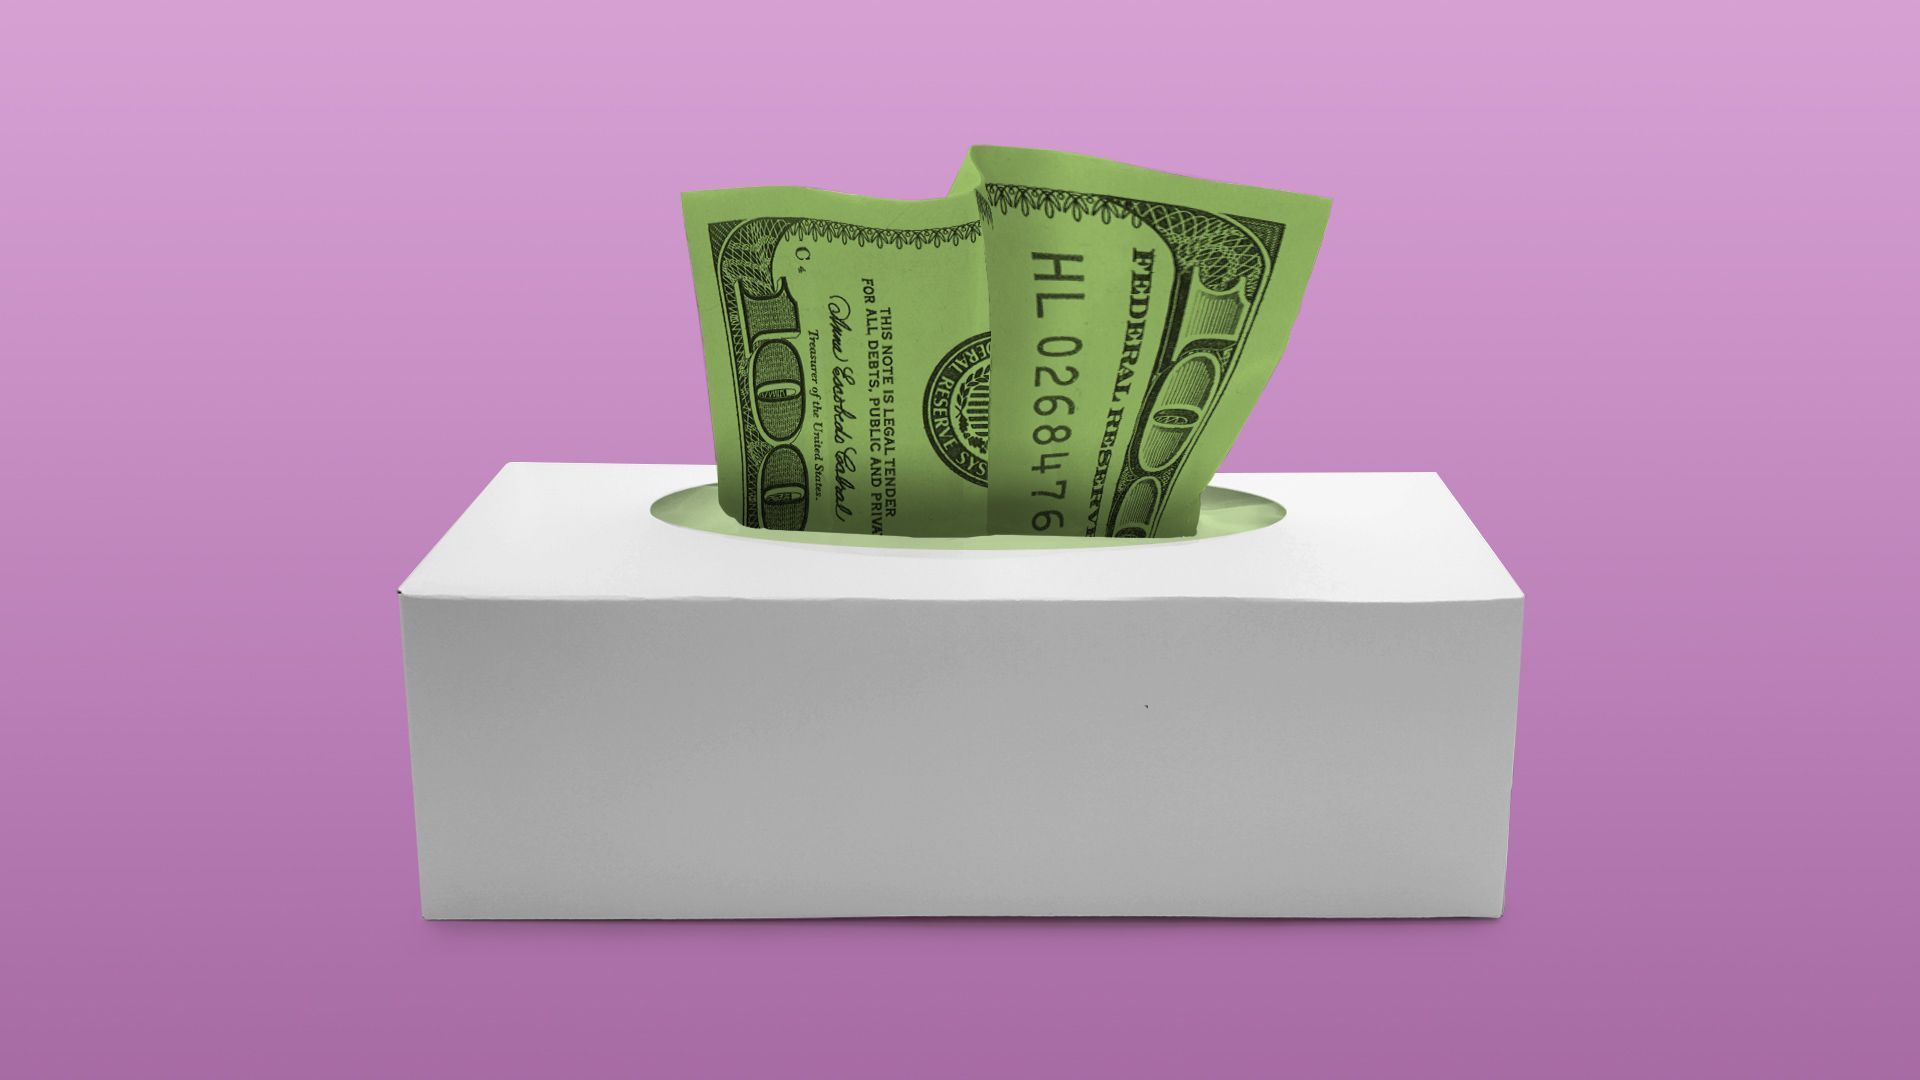 Illustration of a tissue box filled with money instead of tissues.  